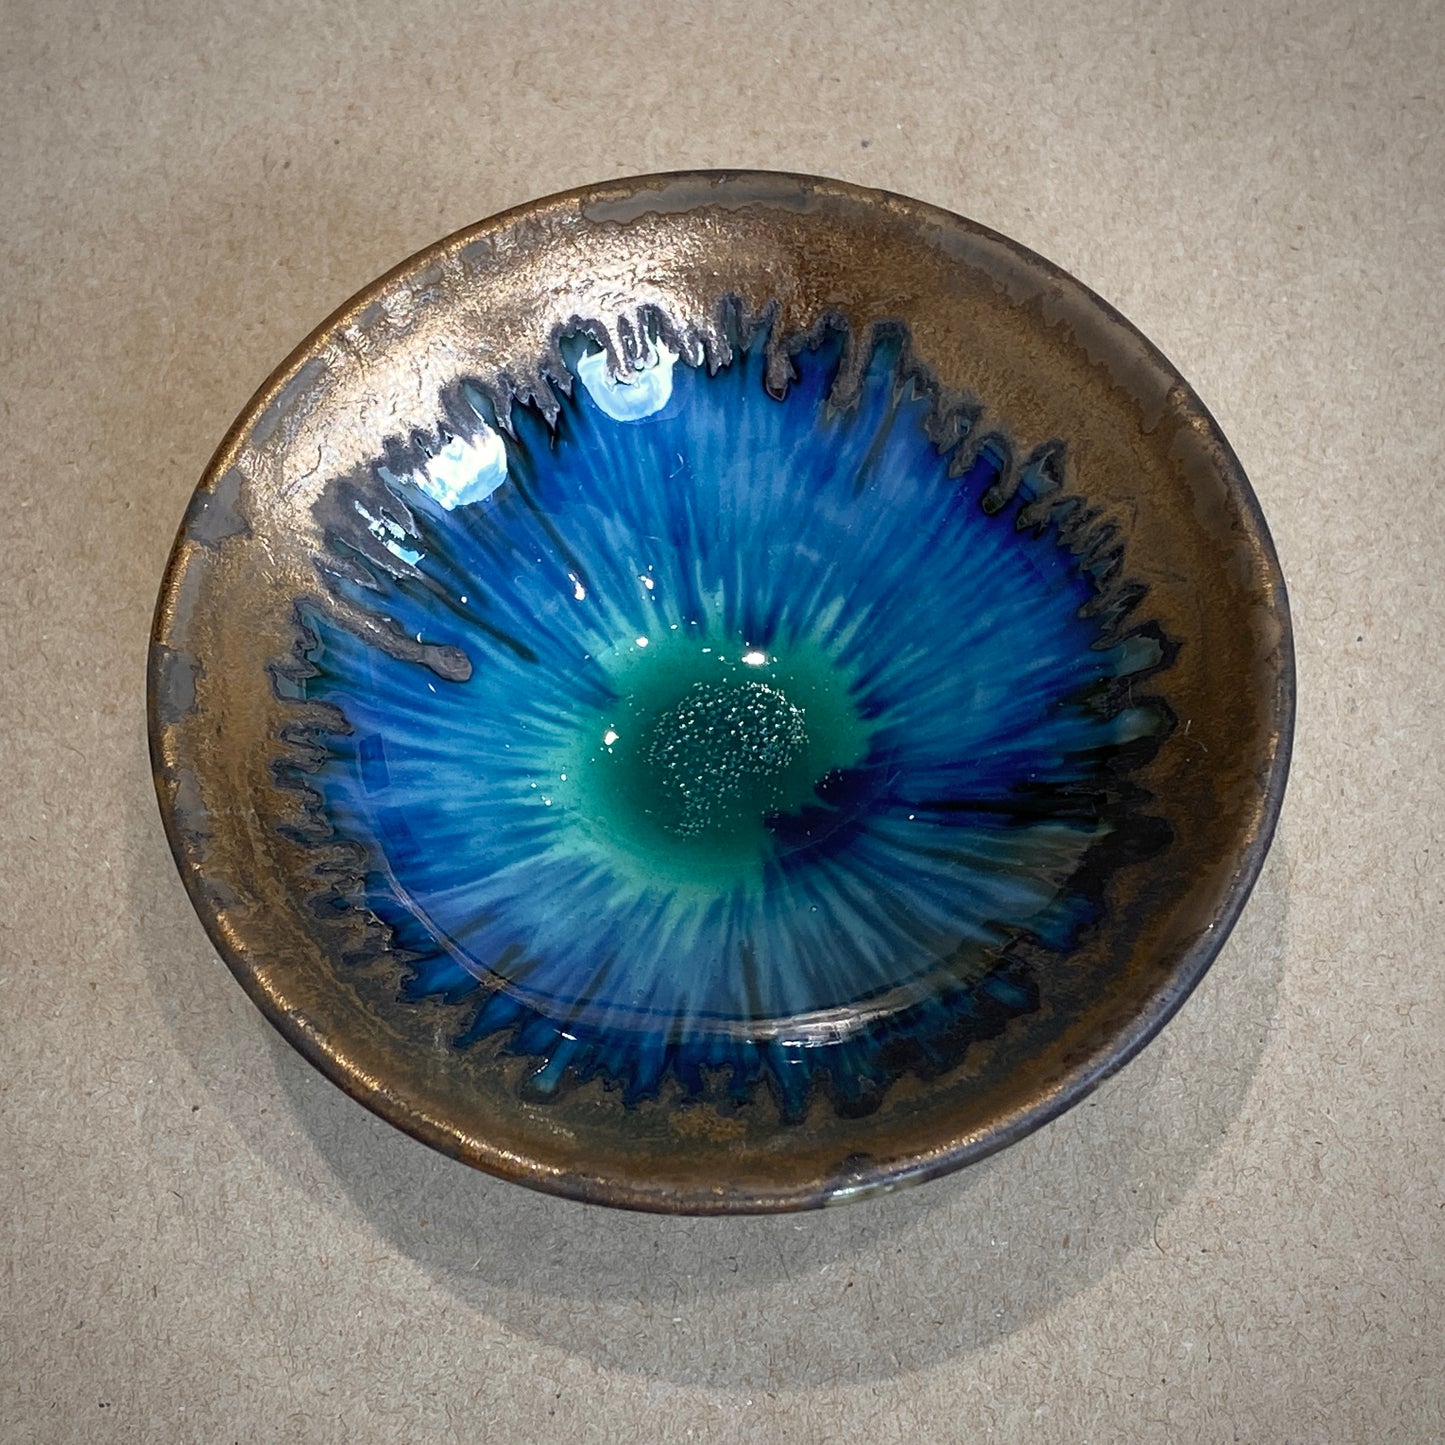 Load image into Gallery viewer, Small Porcelain Bowl
